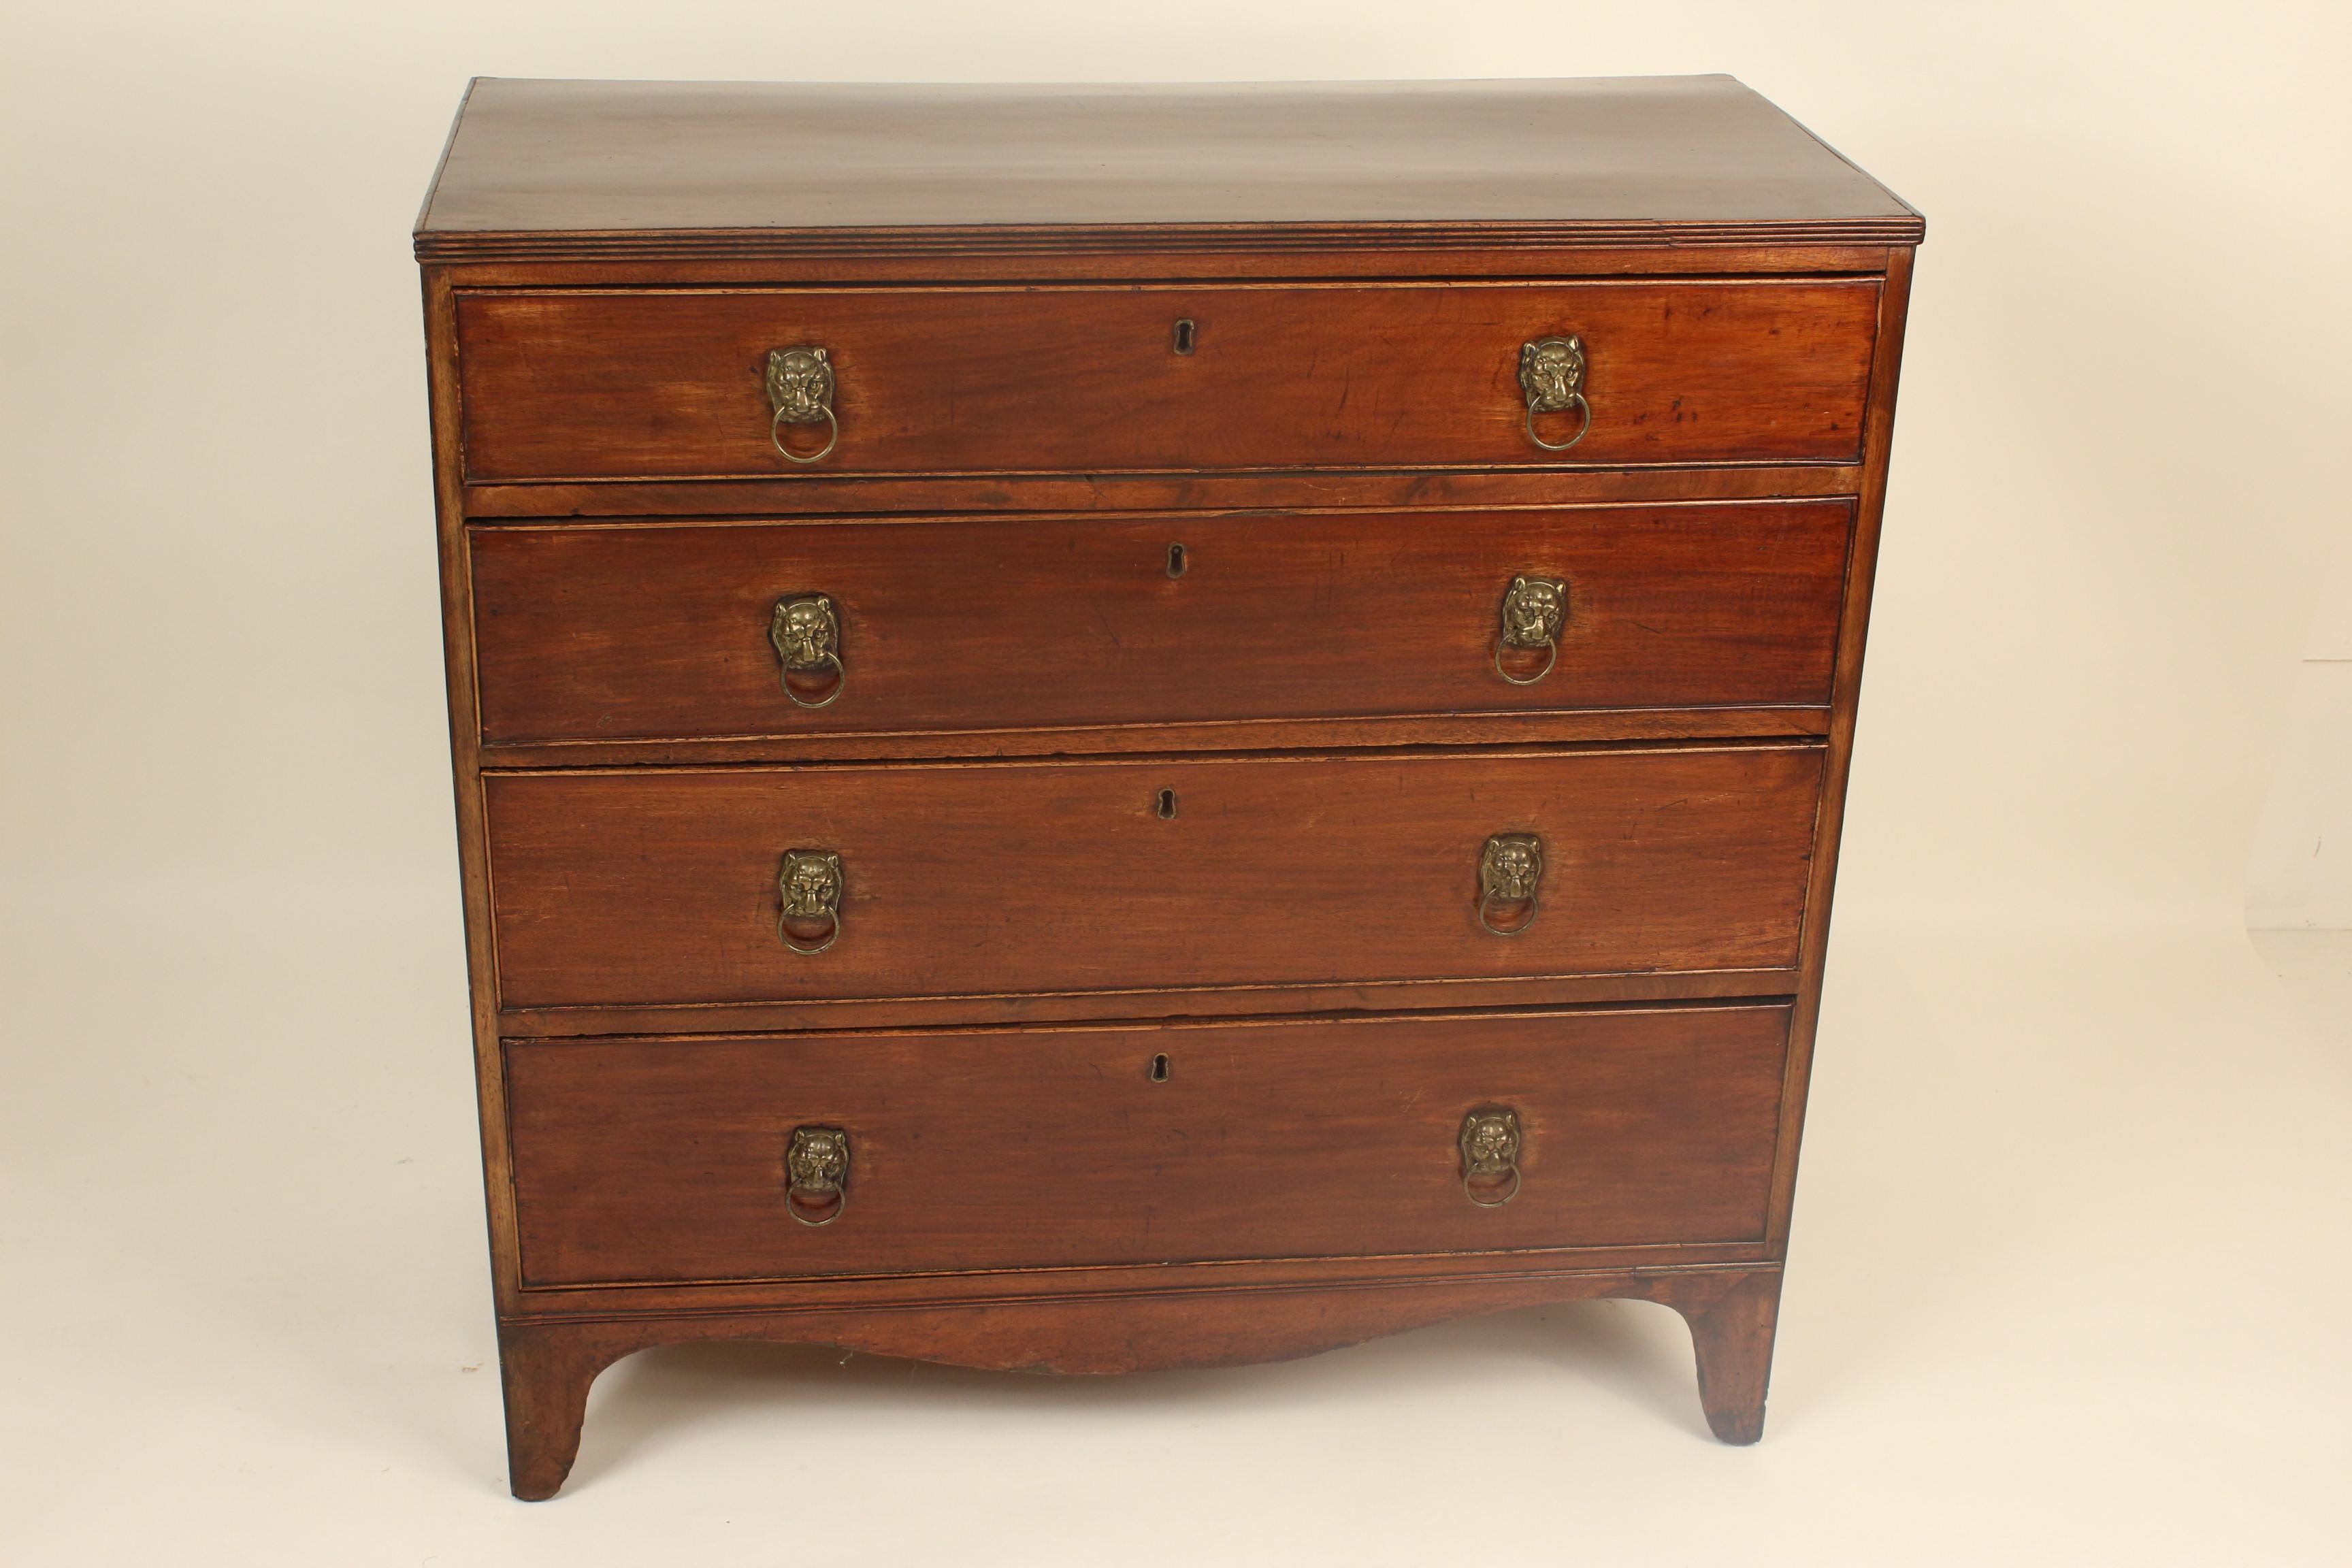 George III mahogany chest of drawers with brass lion head and ring pulls, circa 1800.